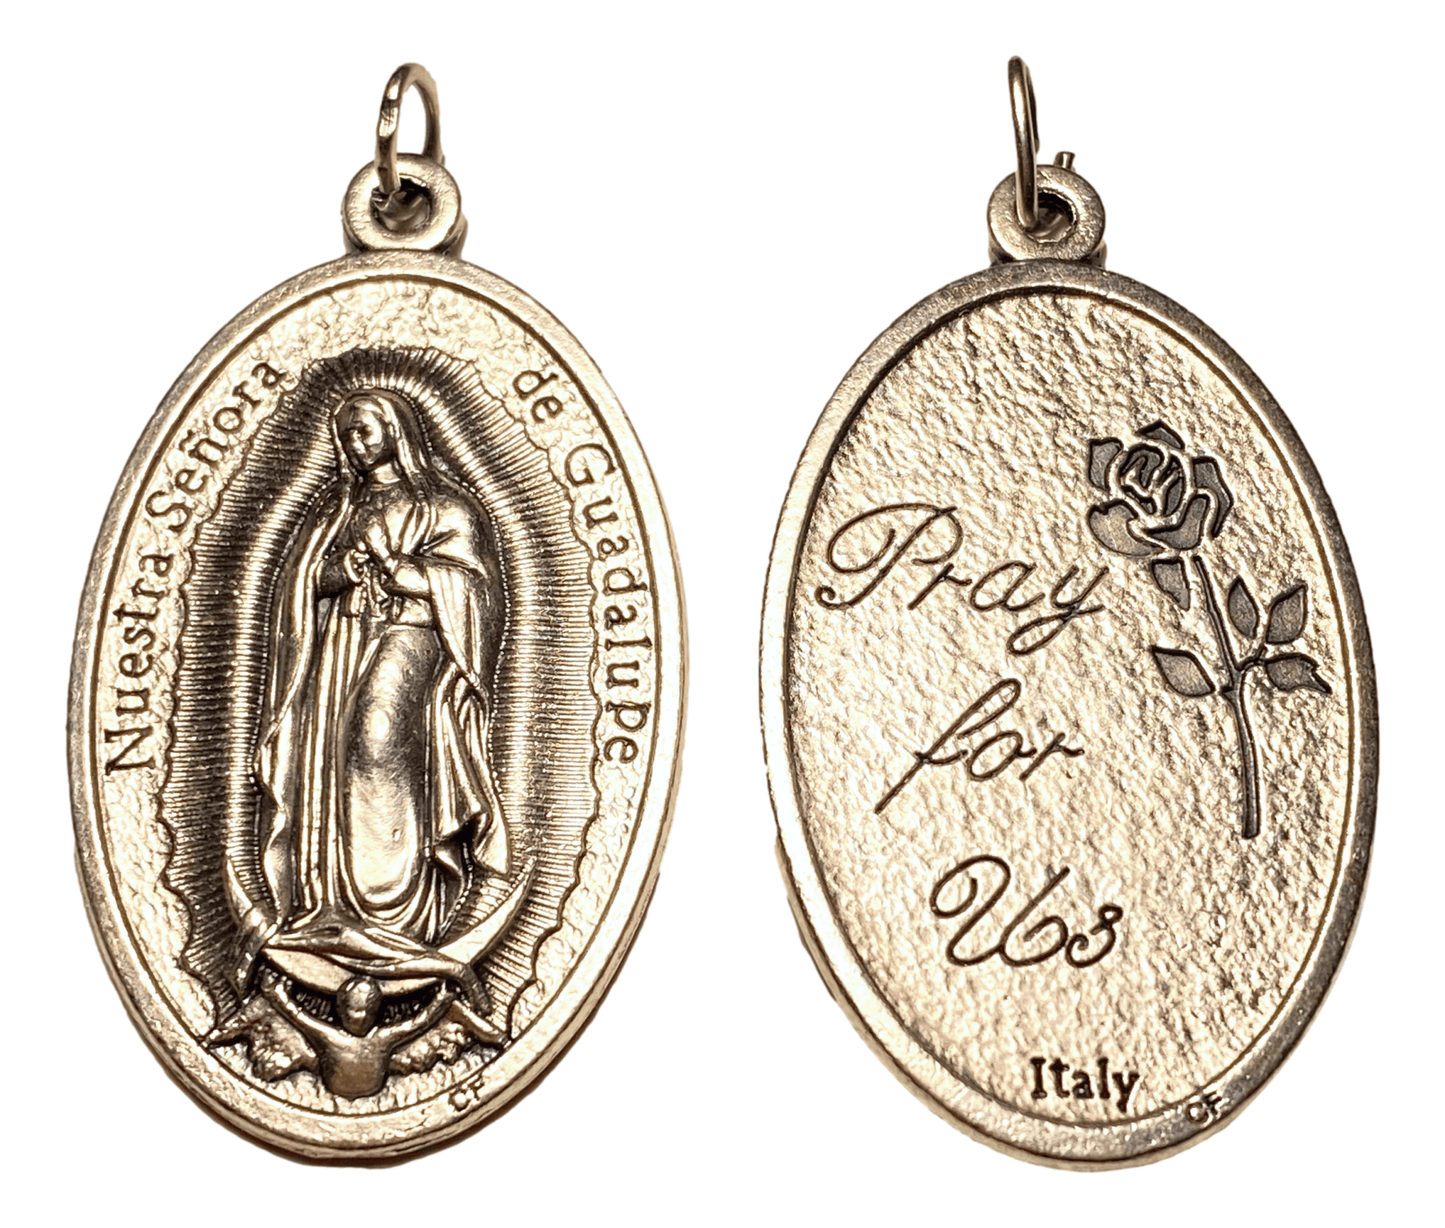 Medal Nuestra Senora De Guadalupe Pray For Us Italian Double-Sided Silver Oxidized Metal Alloy 1 3/4 L x 1 W Inches - Ysleta Mission Gift Shop- VOTED El Paso's Best Gift Shop